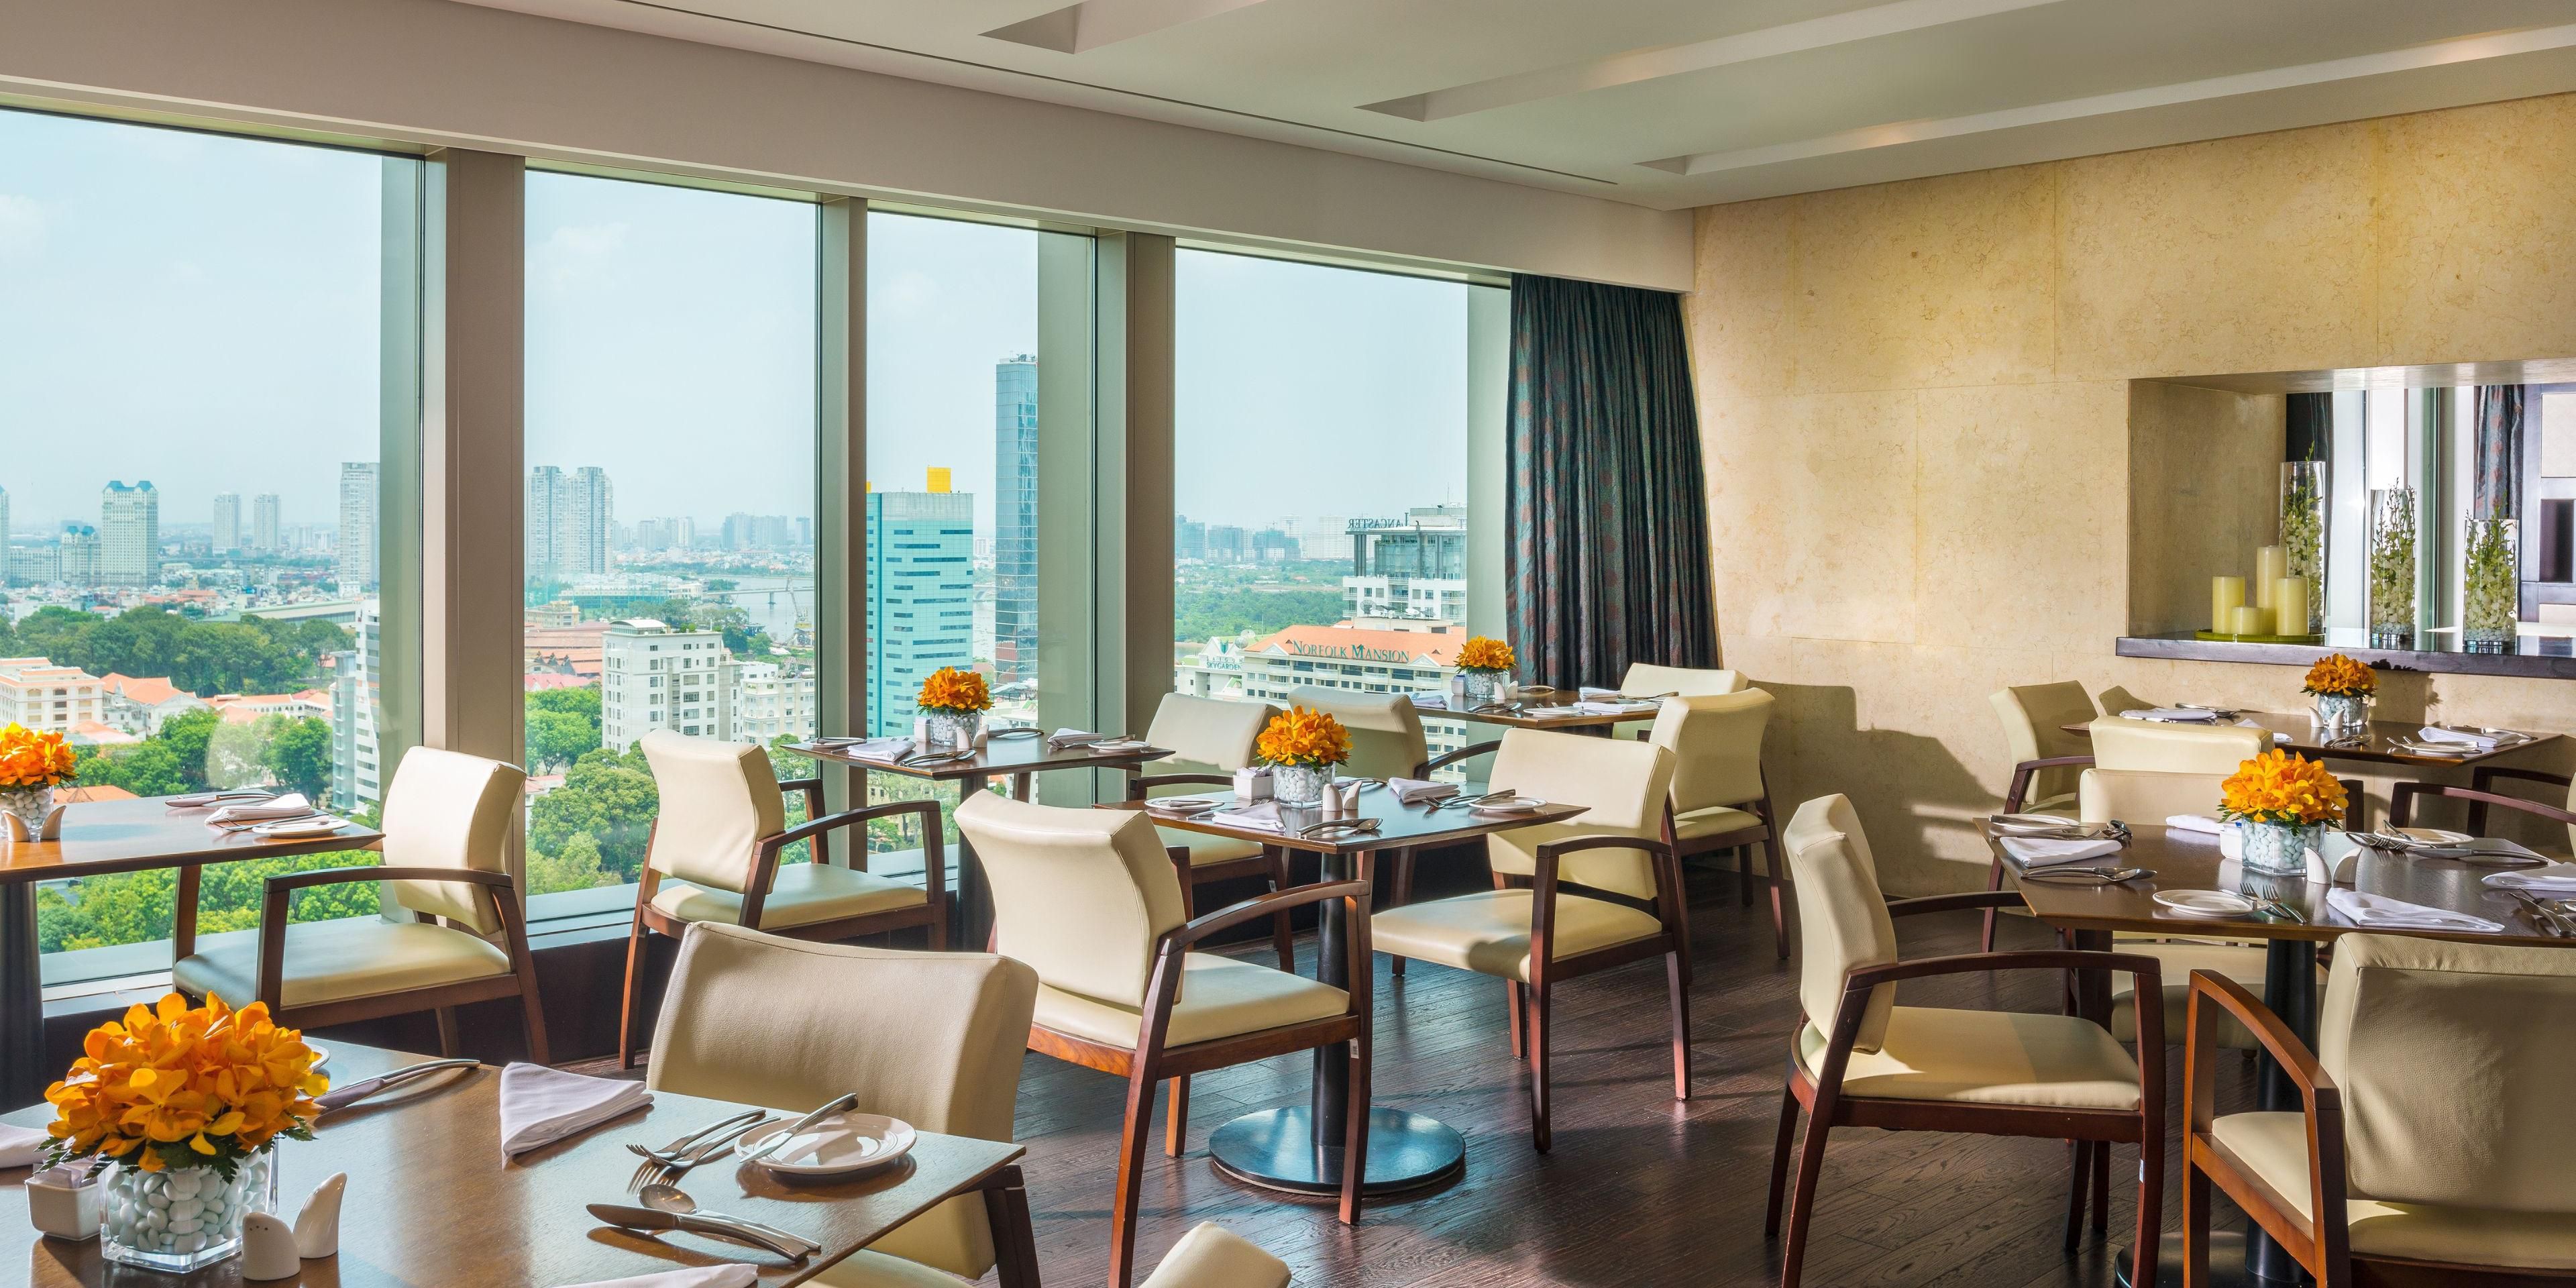 Enjoy Club InterContinental privileges including exclusive access to our Club Lounge on the 19th floor with magnificent views over the city. Take advantage of benefits and indulge yourself with breakfast, afternoon tea, and a comprehensive selection of evening canapés and cocktails.